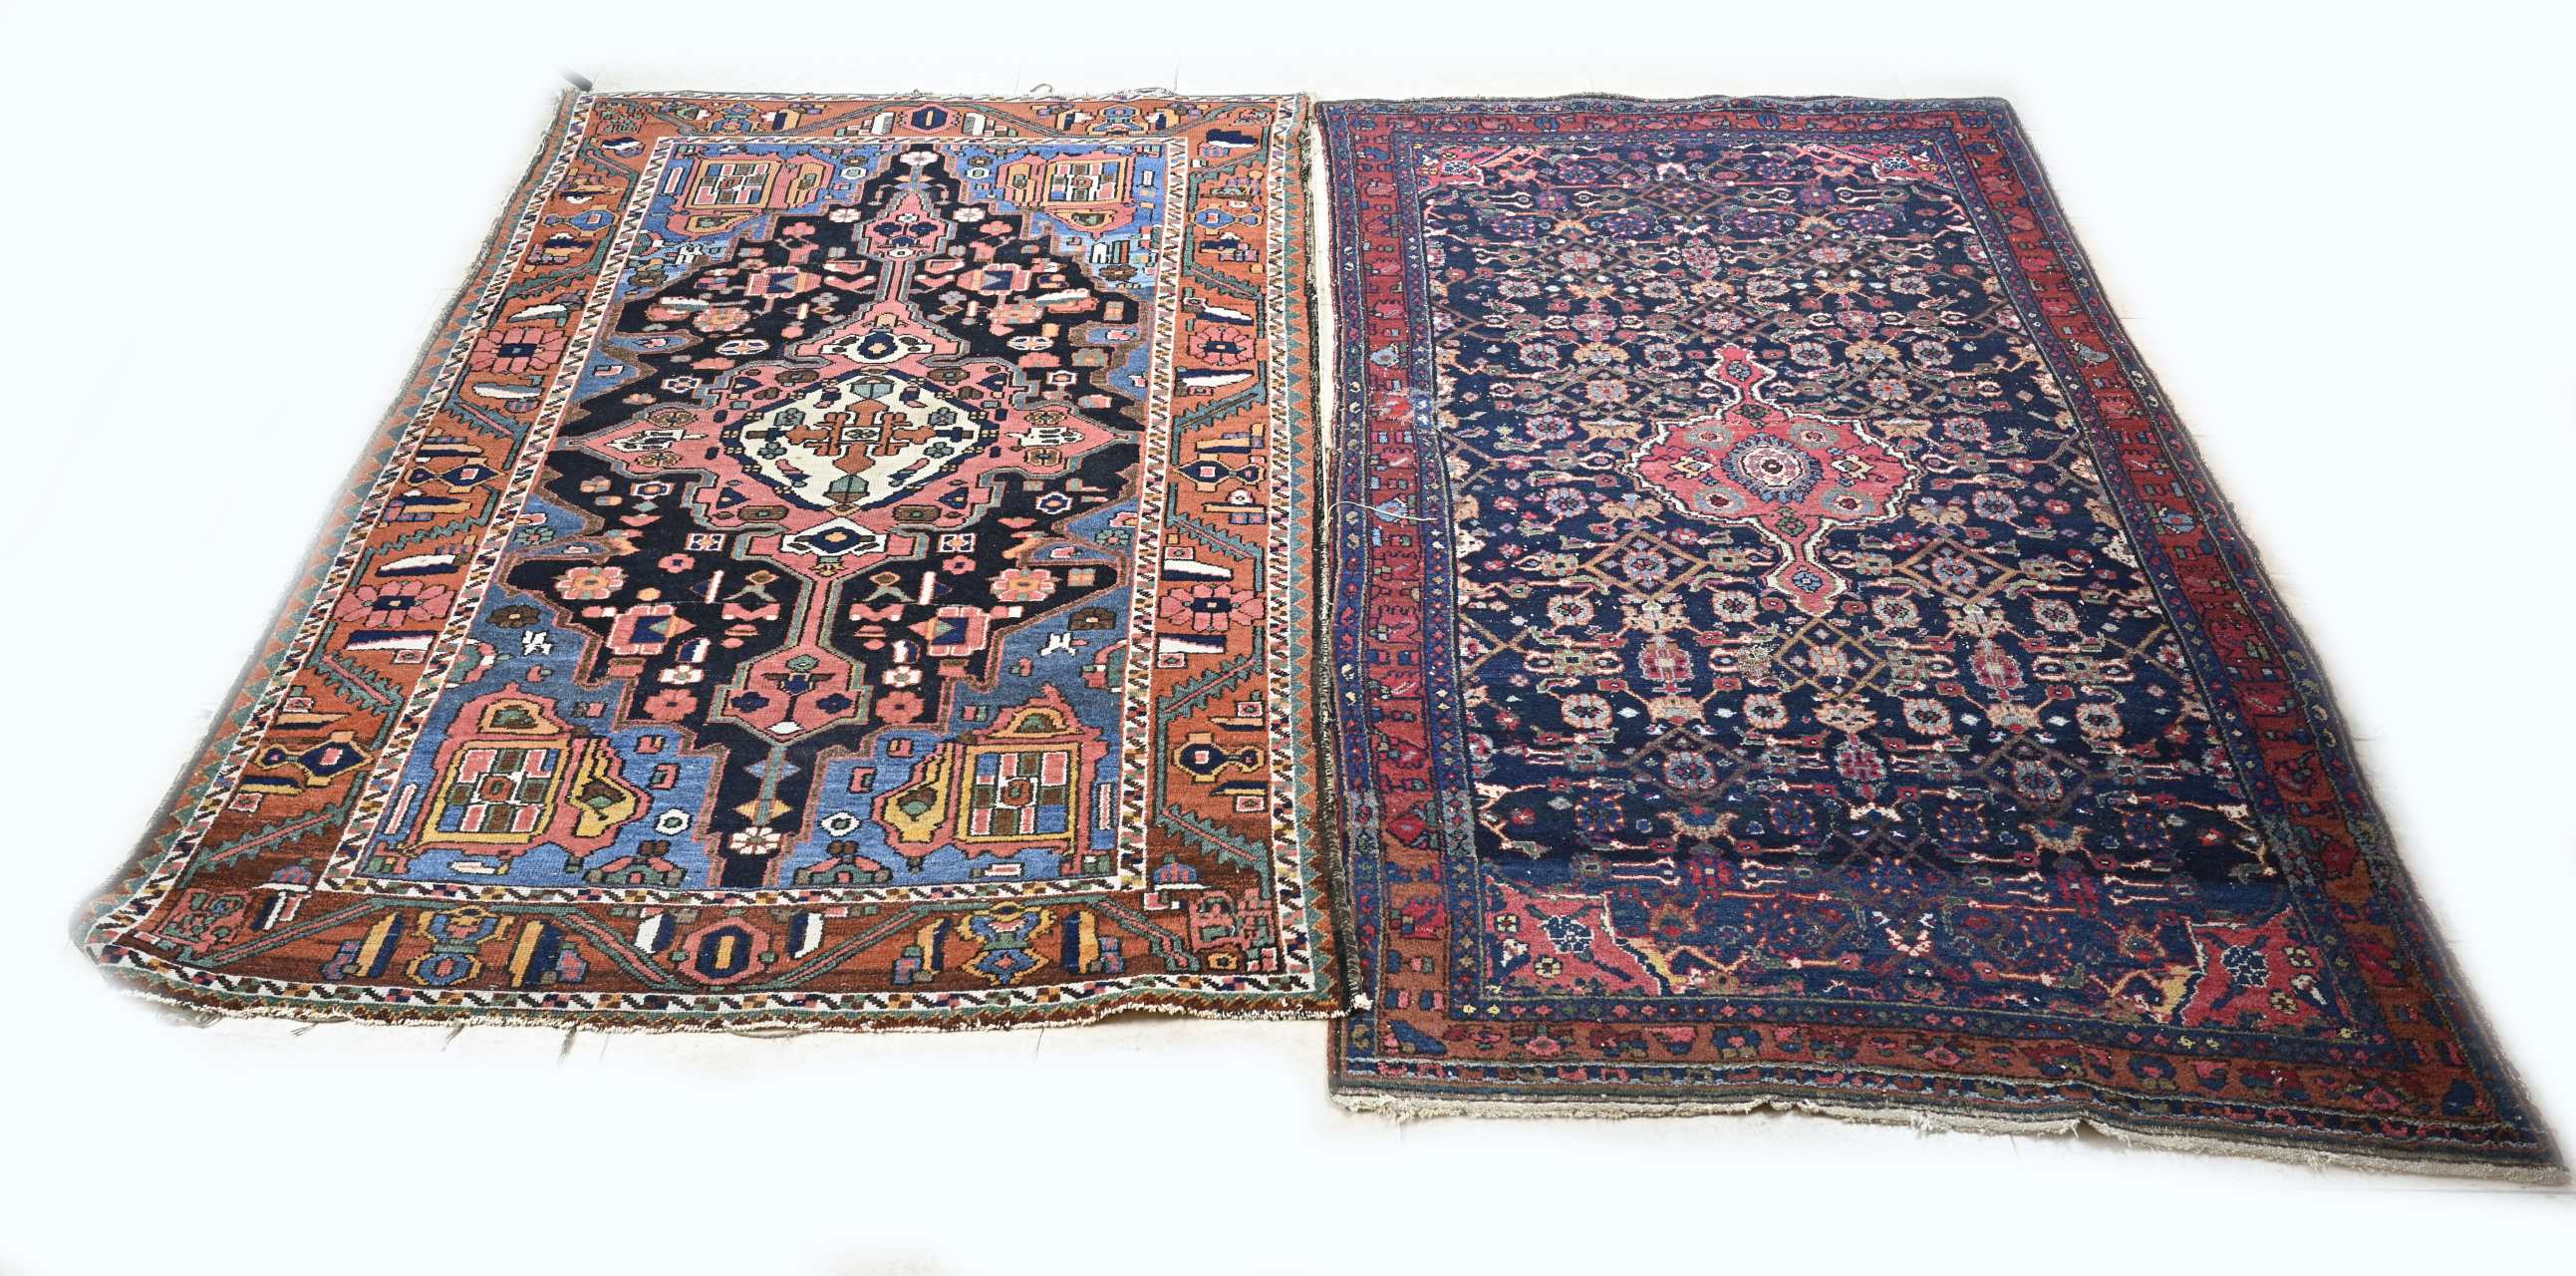 2x Hand-knotted rug